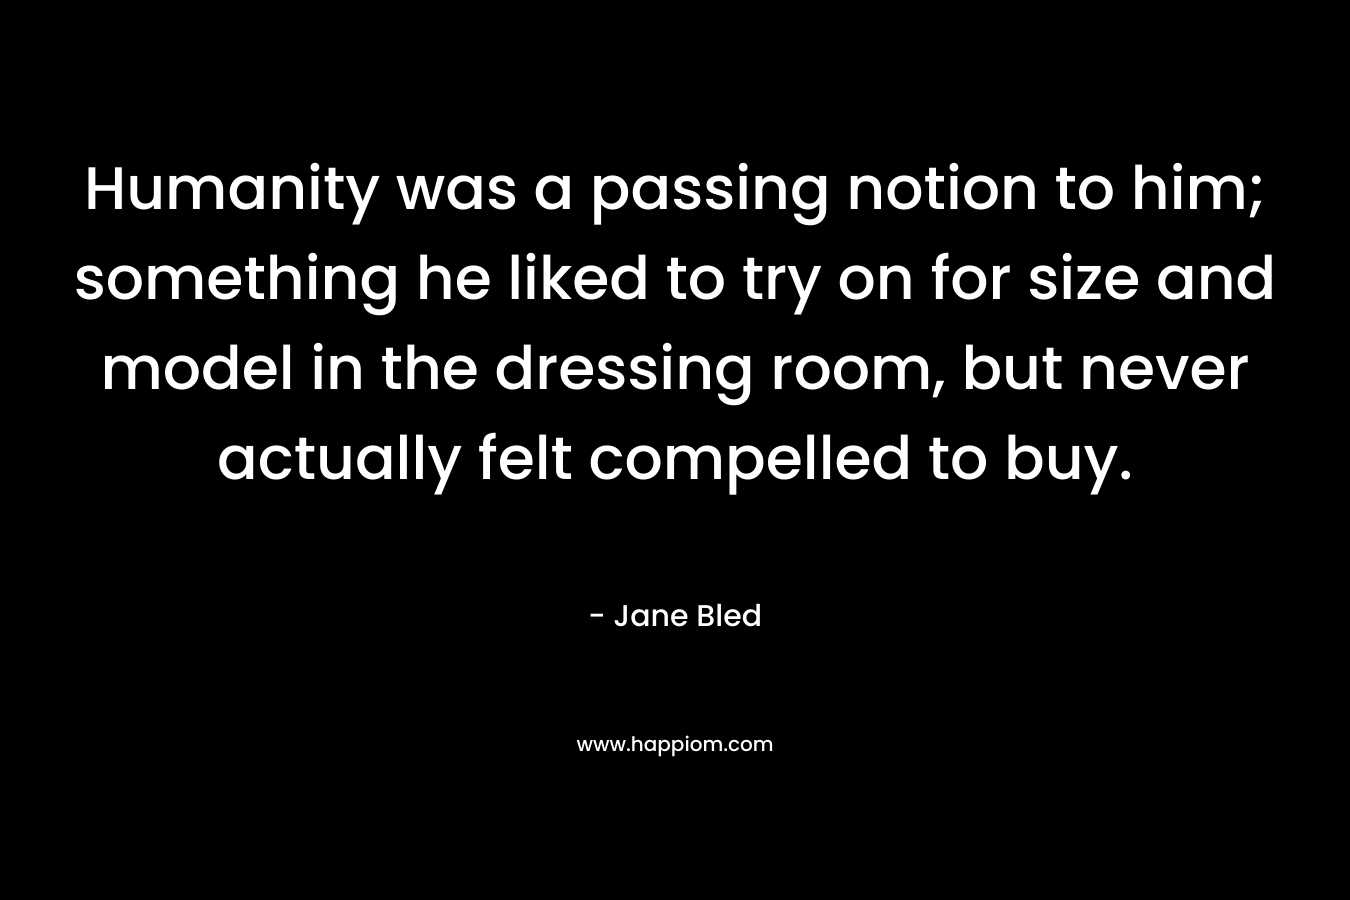 Humanity was a passing notion to him; something he liked to try on for size and model in the dressing room, but never actually felt compelled to buy. – Jane Bled